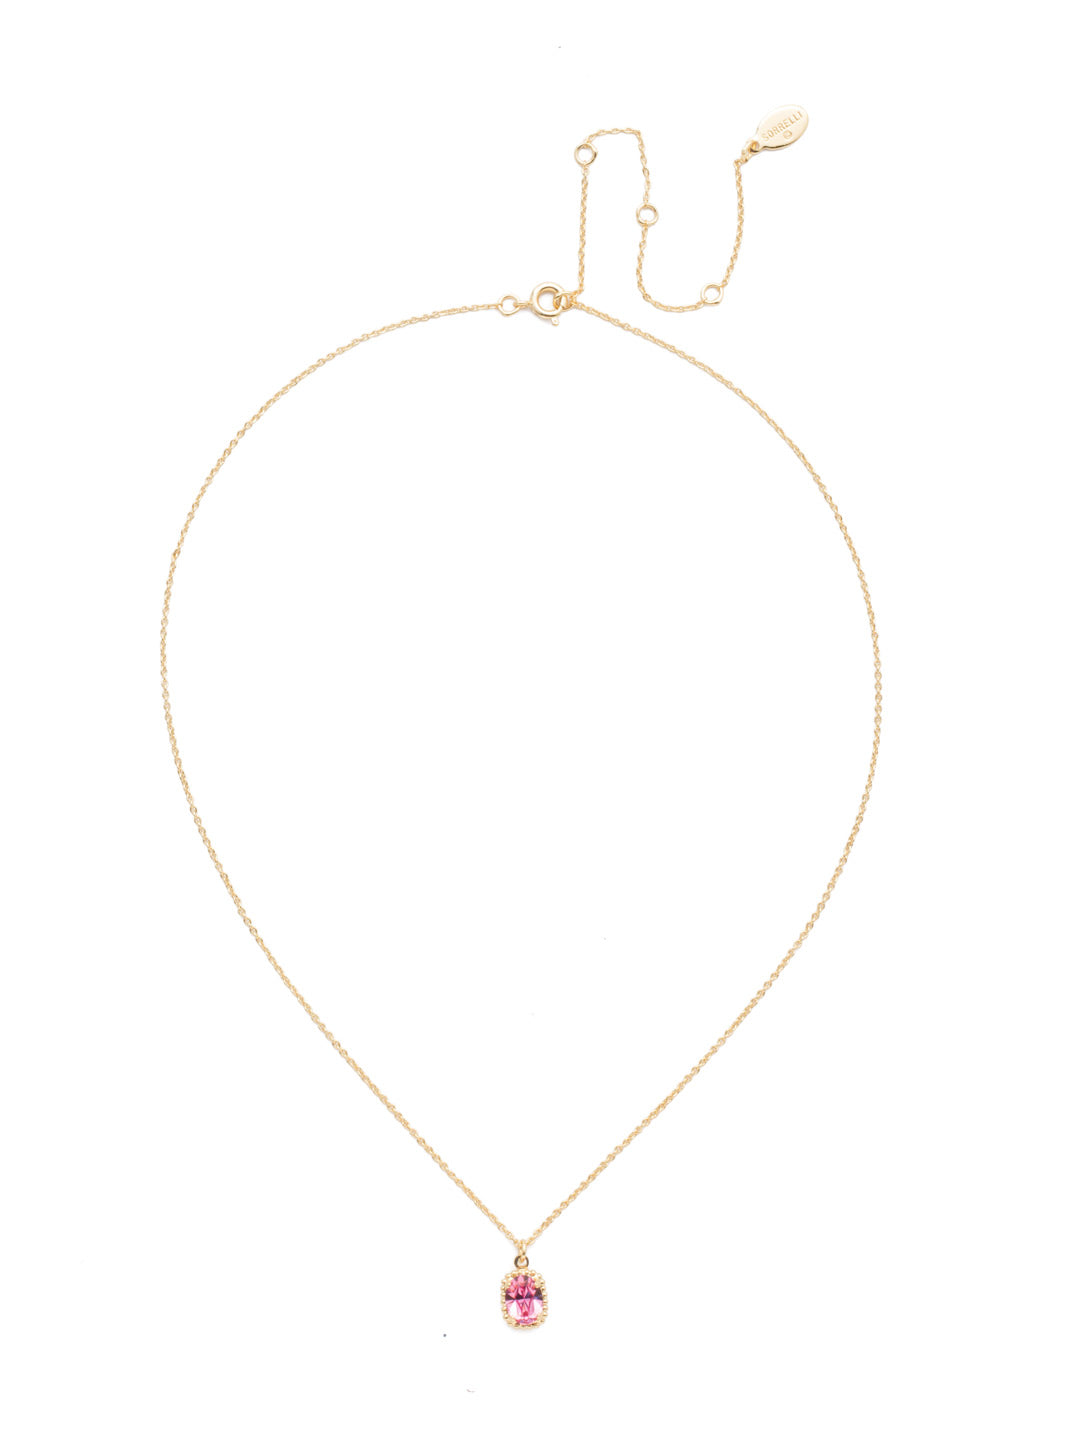 Maisie Pendant Necklace - NEF49BGBGA - This is the perfect day-to-night sparkling tiny pendant necklace that has an adjustable chain to fit your neckline. From Sorrelli's Begonia collection in our Bright Gold-tone finish.